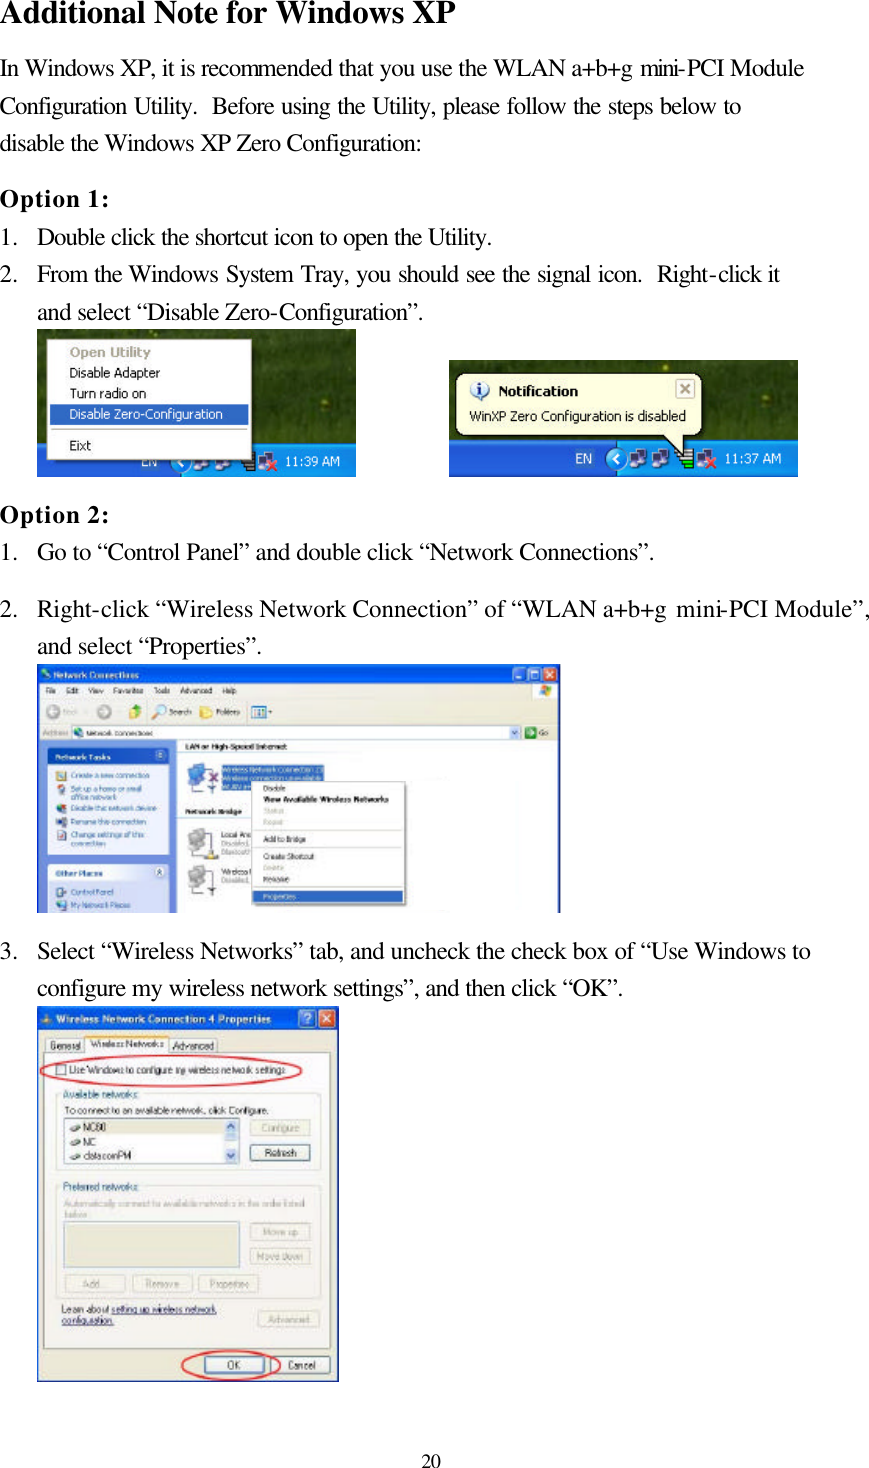  20 Additional Note for Windows XP   In Windows XP, it is recommended that you use the WLAN a+b+g mini-PCI Module Configuration Utility.  Before using the Utility, please follow the steps below to disable the Windows XP Zero Configuration:  Option 1: 1.  Double click the shortcut icon to open the Utility. 2.  From the Windows System Tray, you should see the signal icon.  Right-click it and select “Disable Zero-Configuration”.      Option 2: 1.  Go to “Control Panel” and double click “Network Connections”.  2.  Right-click “Wireless Network Connection” of “WLAN a+b+g mini-PCI Module”, and select “Properties”.   3.  Select “Wireless Networks” tab, and uncheck the check box of “Use Windows to configure my wireless network settings”, and then click “OK”.  